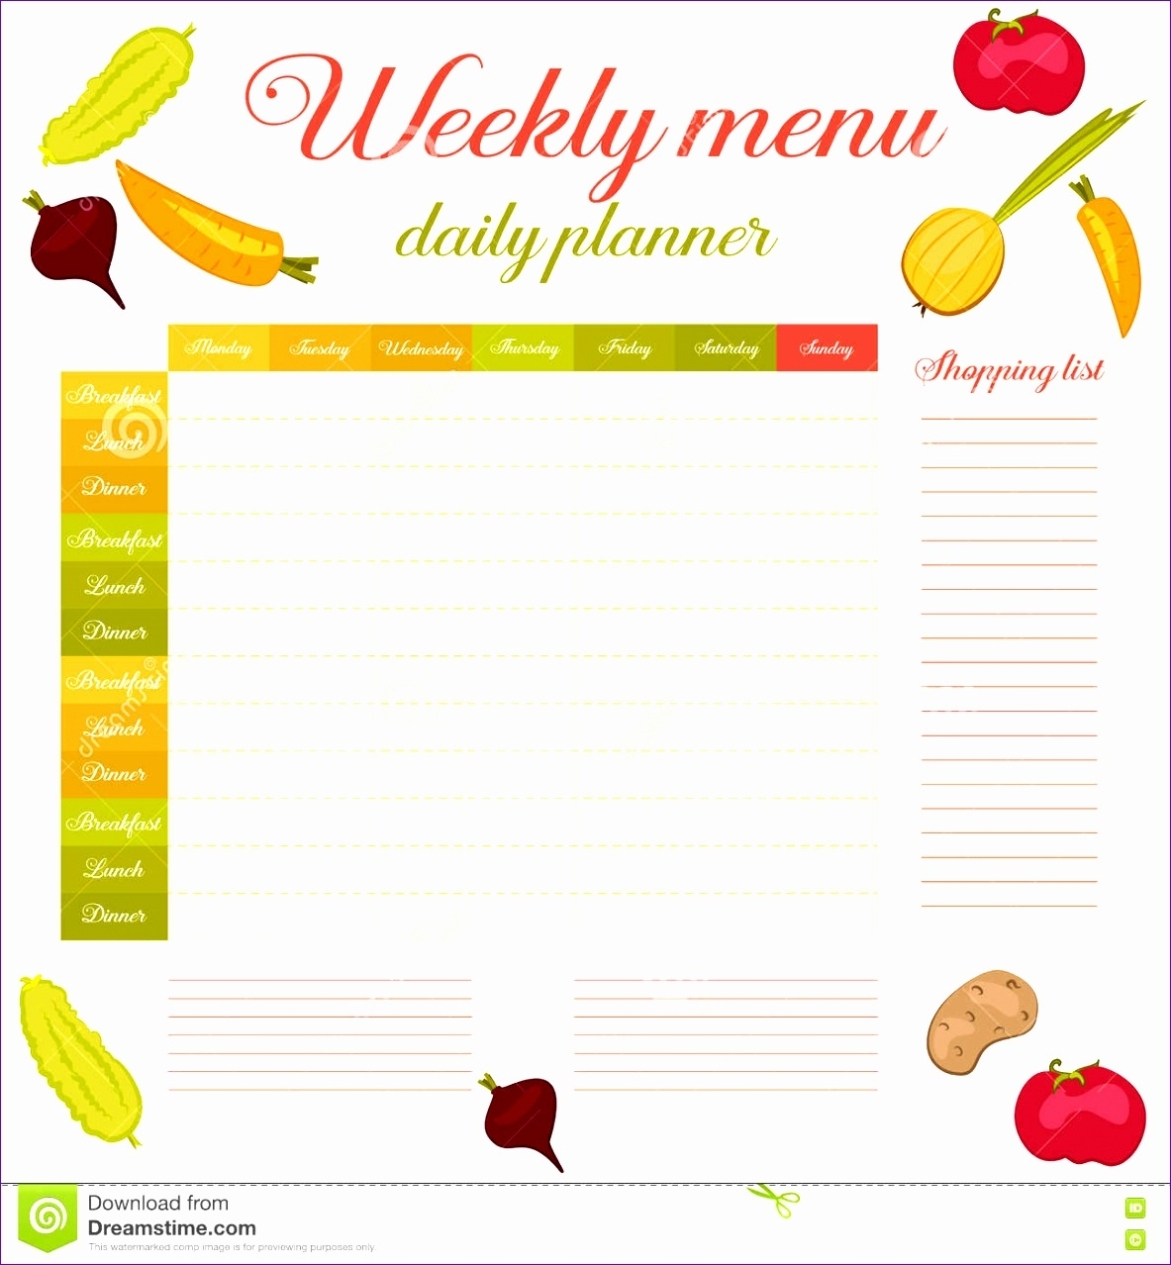 14 Shopping List Template Excel - Excel Templates for Menu Checklist Template